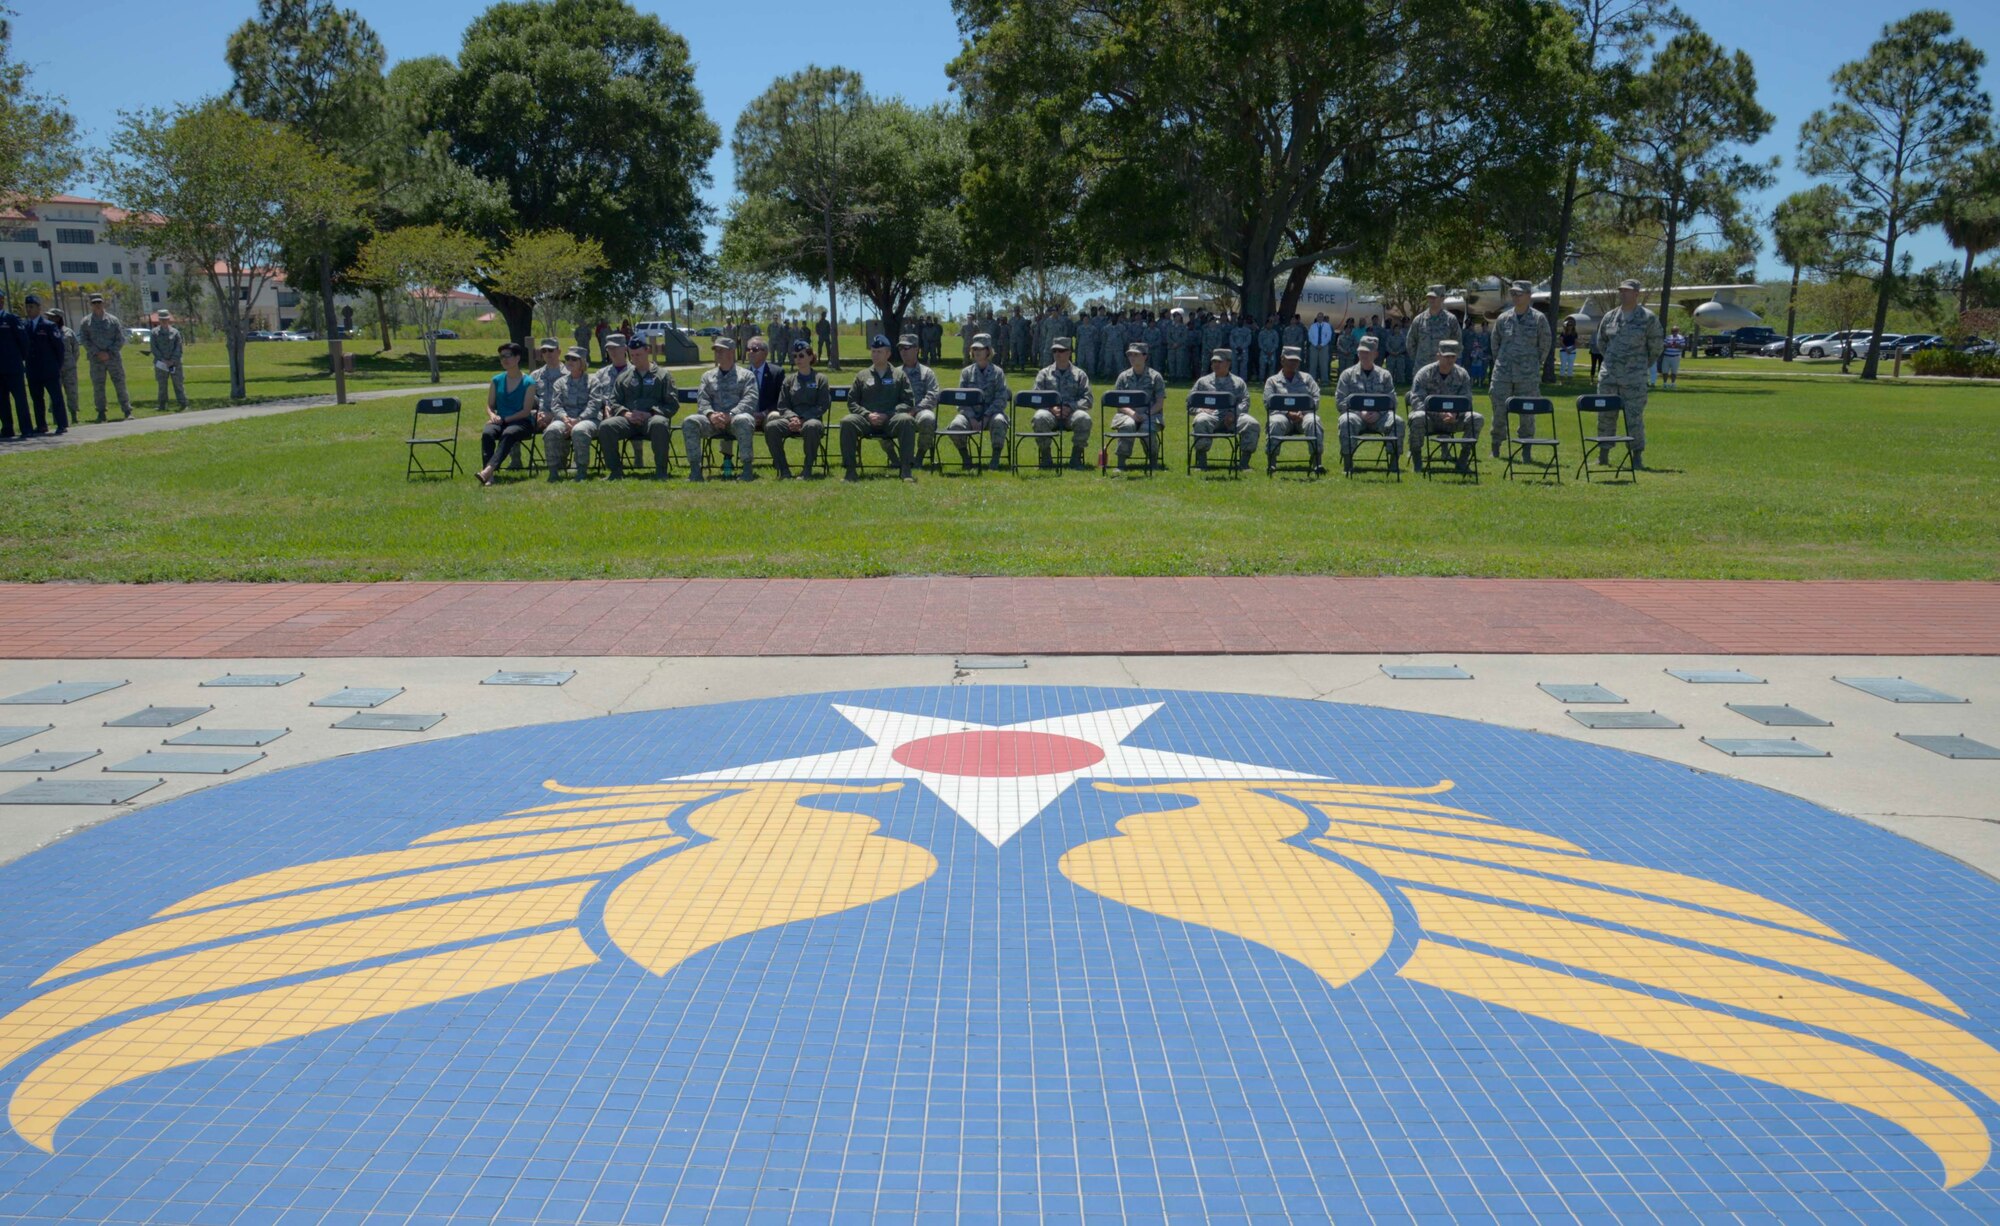 Members of the 6th Air Mobility Wing observe a Memorial Day ceremony at MacDill Air Force Base, Fla., May 26, 2017. Personnel and members of the community were invited to attend and pay respect to fallen heroes. (U.S. Air Force photo by Staff Sgt. Vernon L. Fowler Jr.)